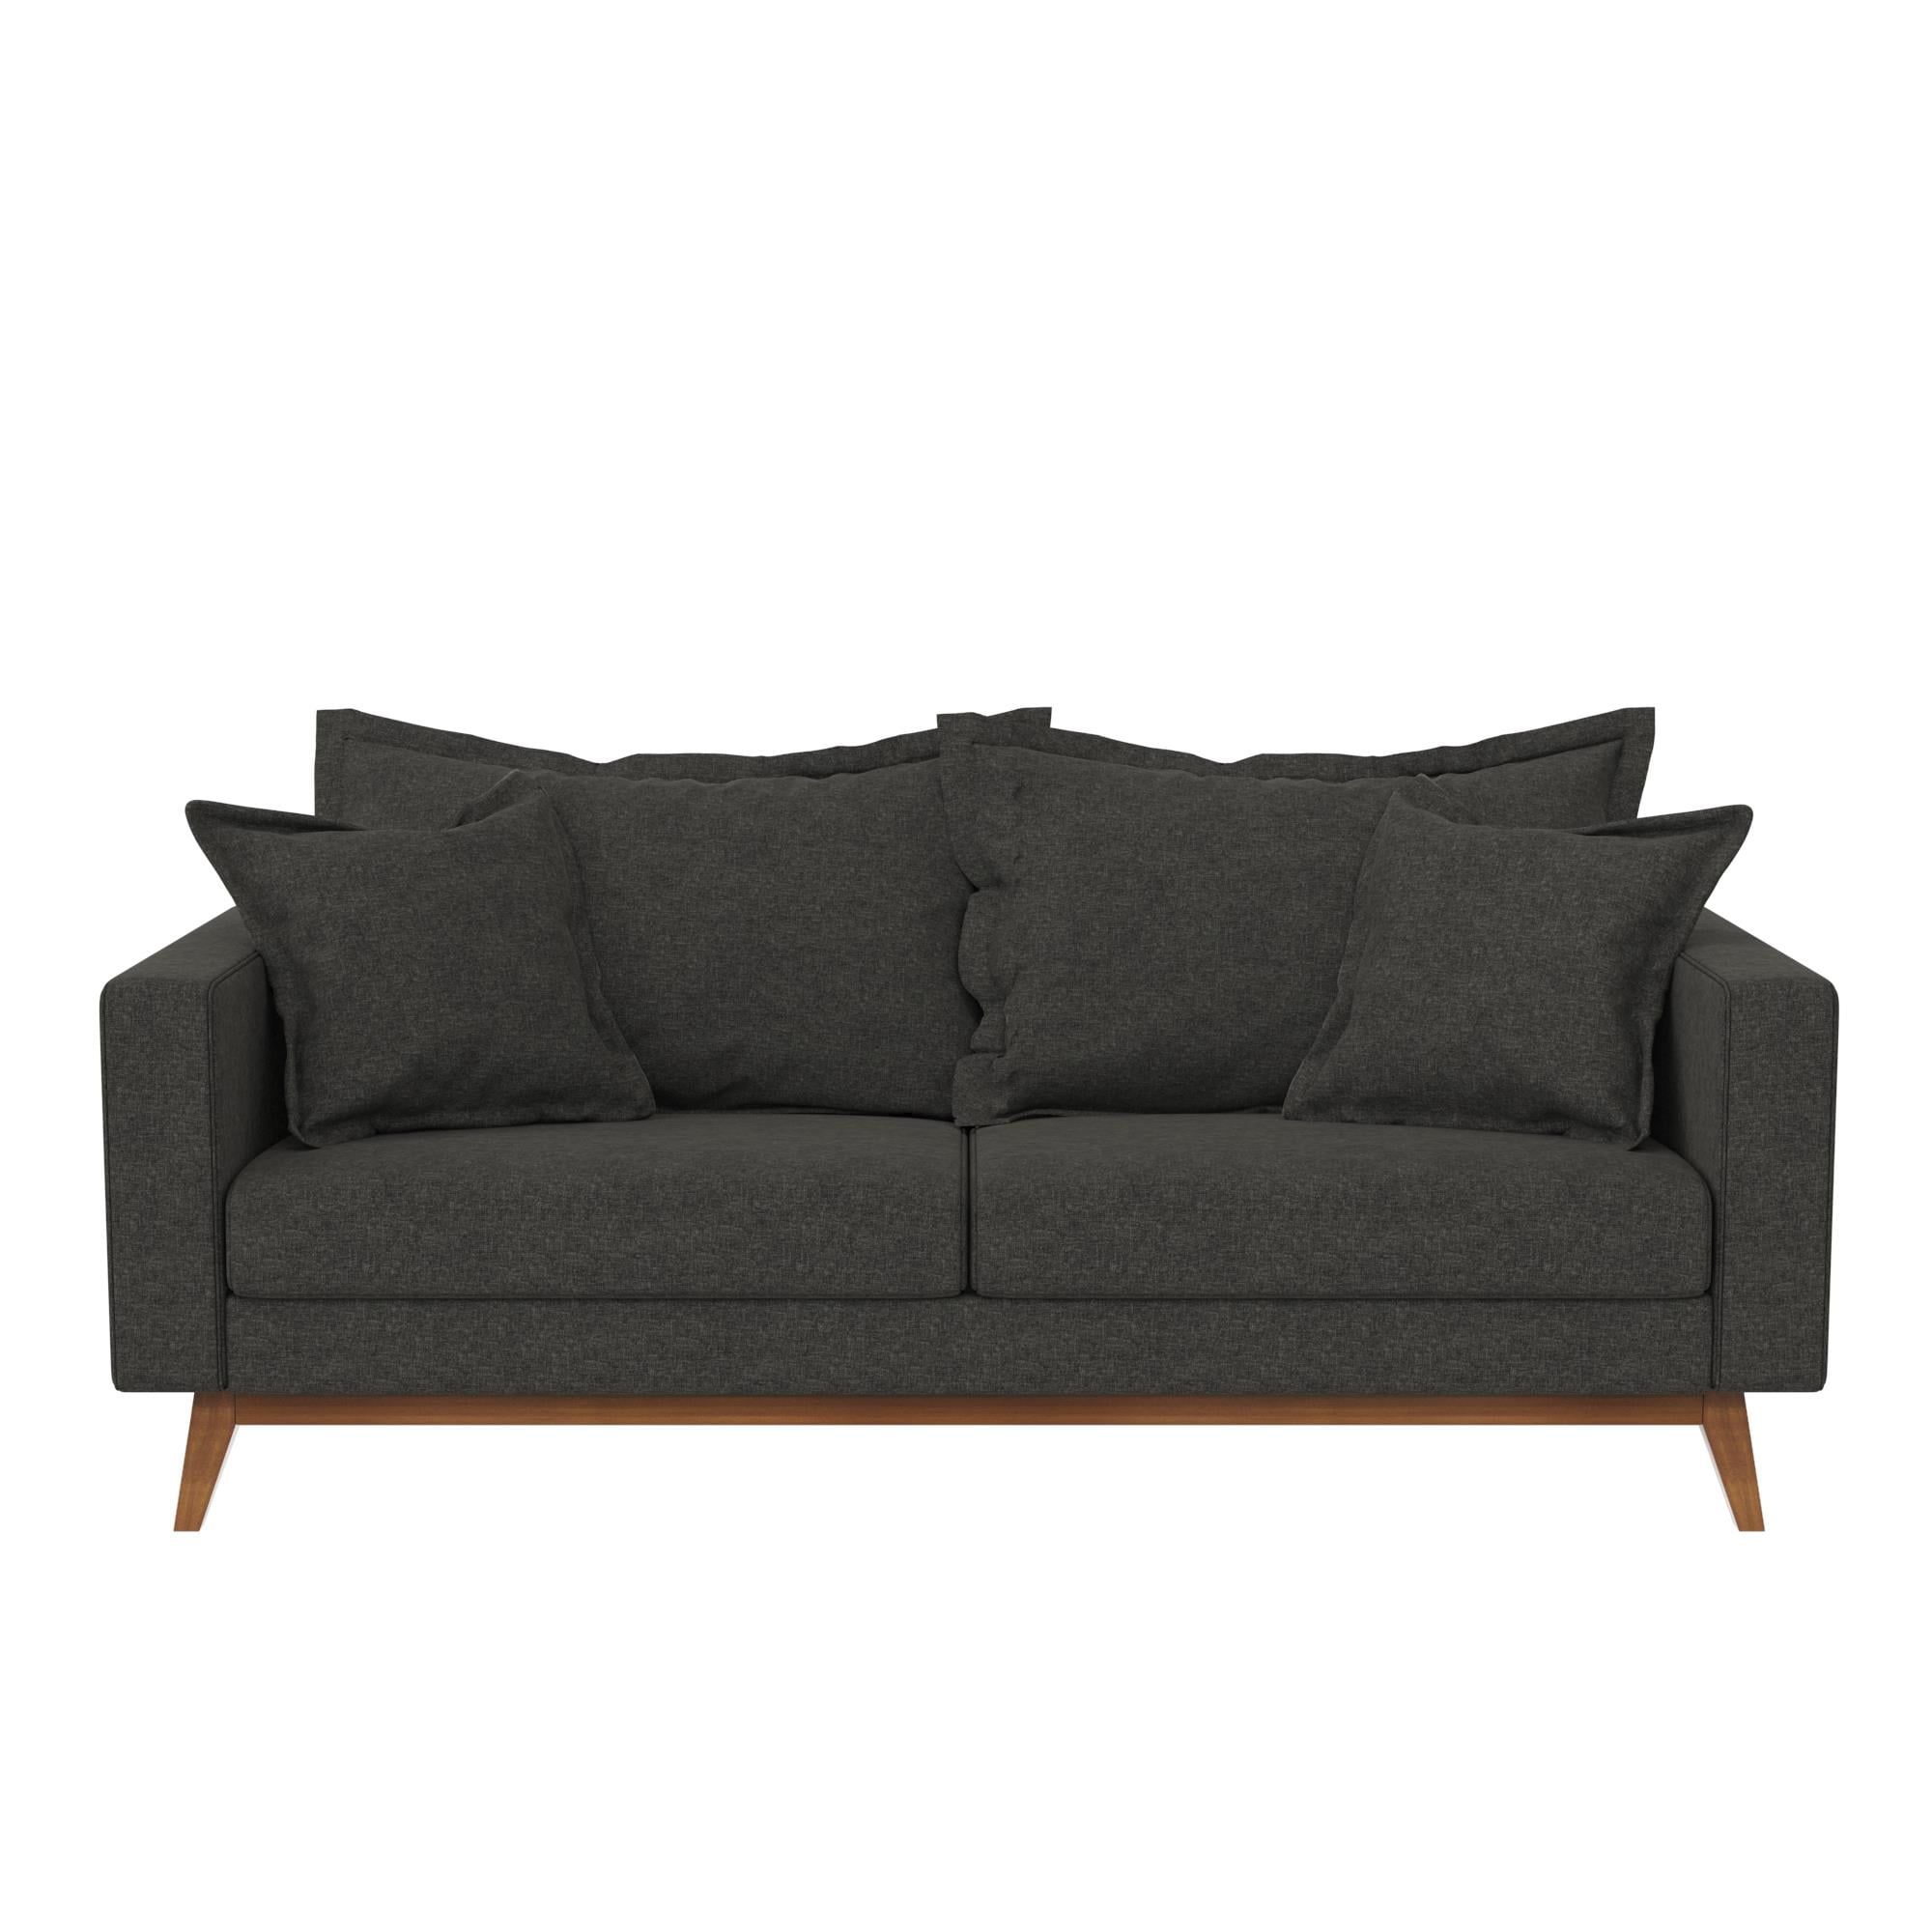 Dhp Miriam Pillowback Wood Base Sofa, Gray Linen – Walmart Intended For Sofas With Pillowback Wood Bases (View 13 of 20)